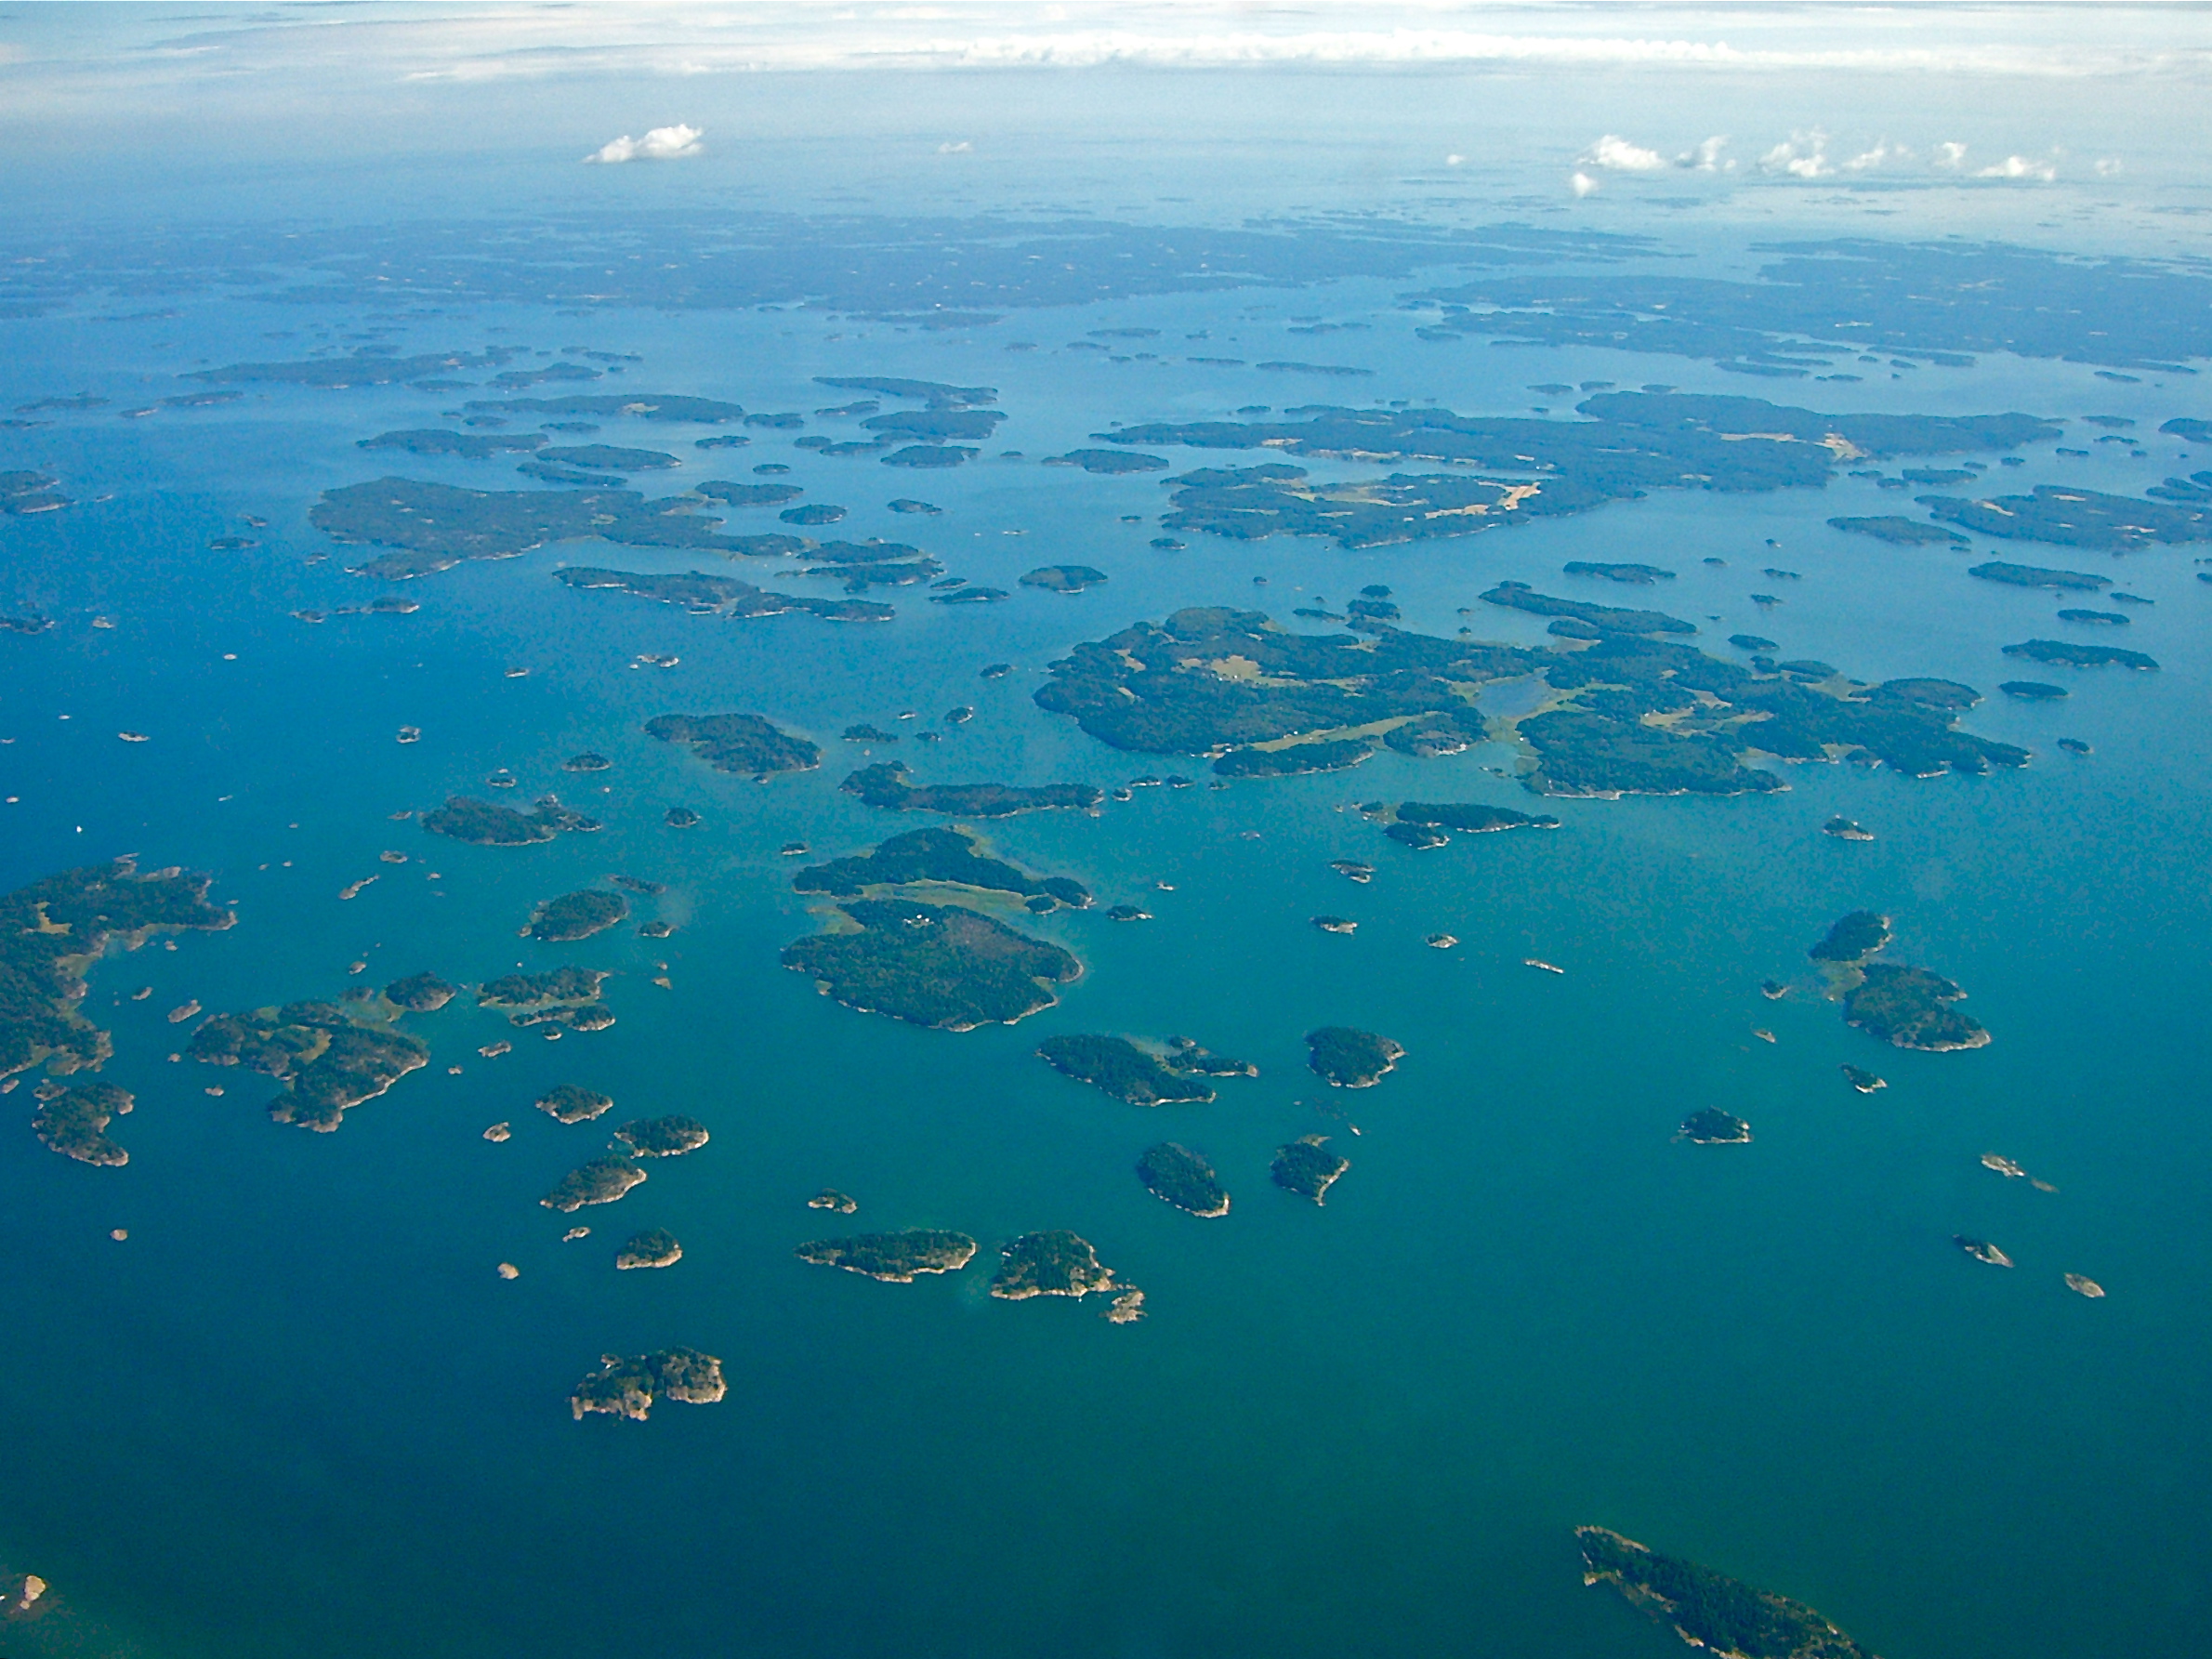 An aerial view of the tiny islets or also known as the Finnish Archipelago